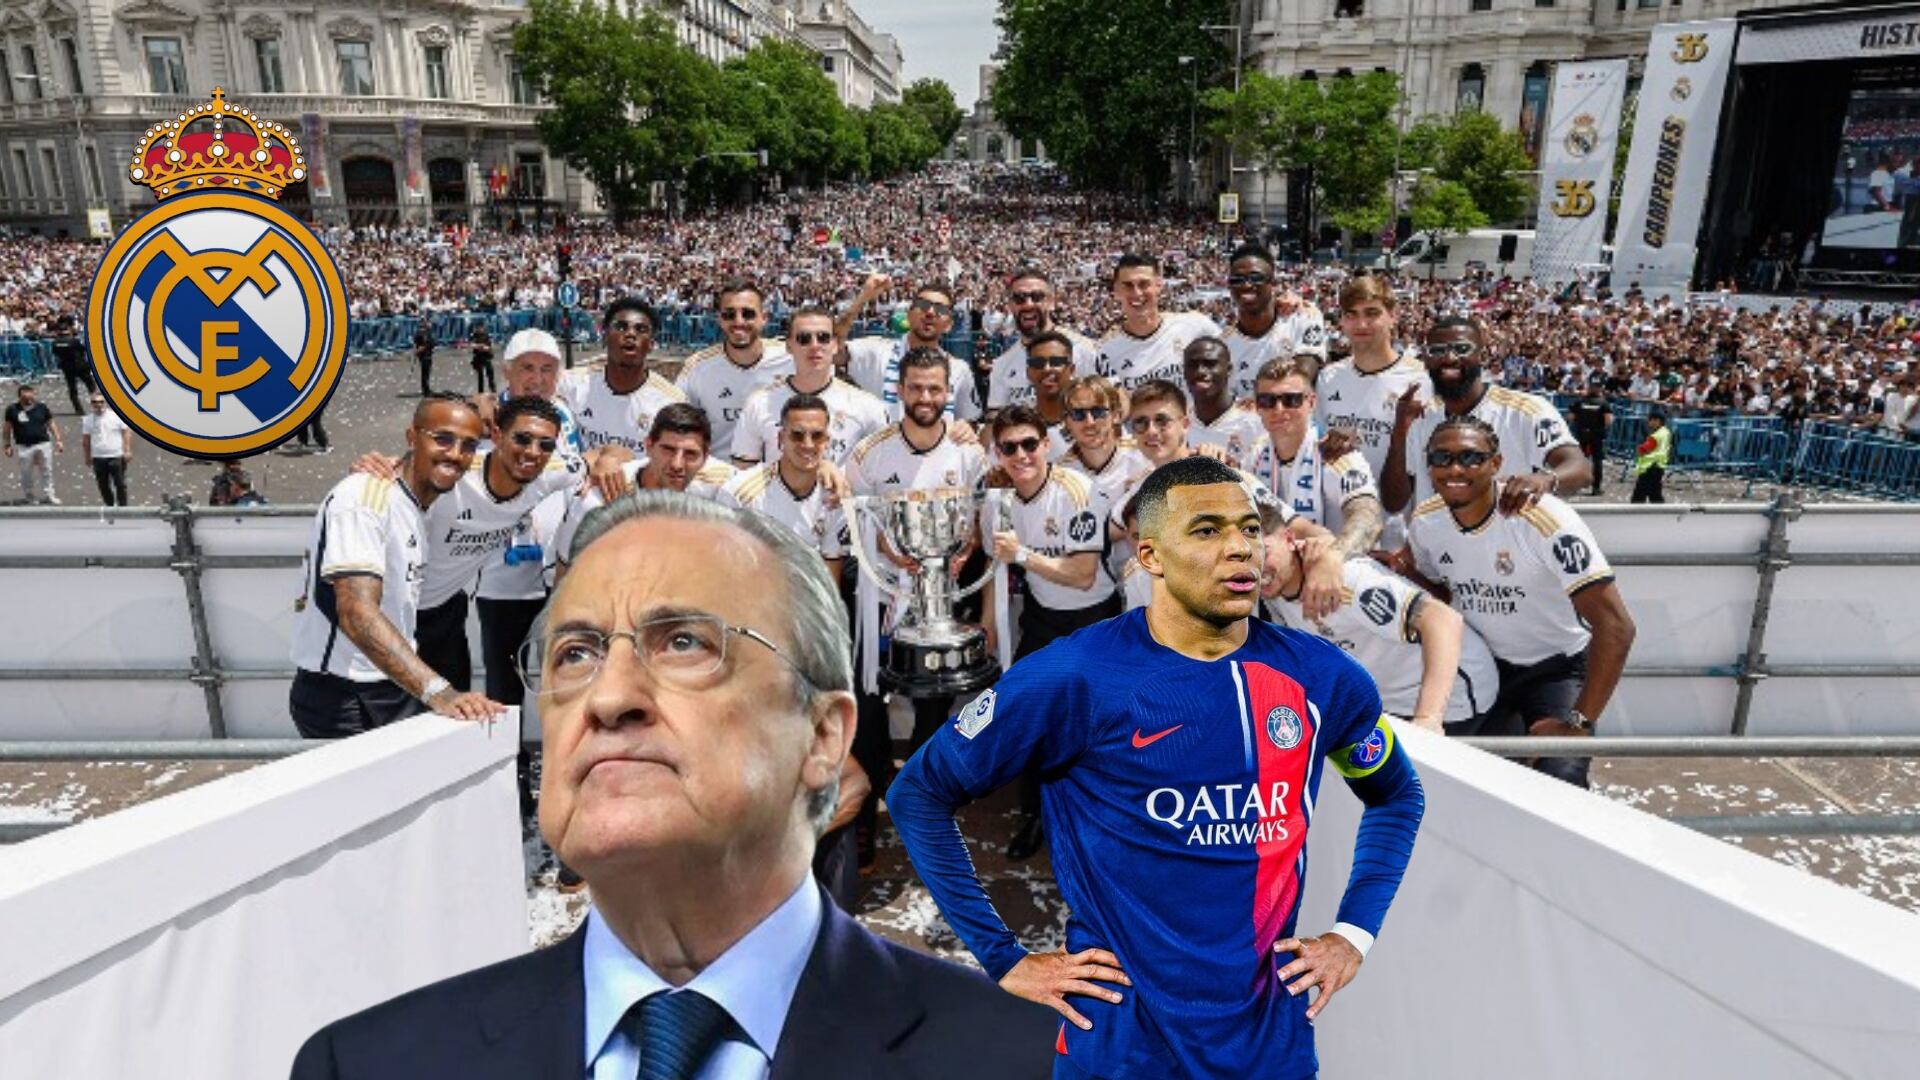 (VIDEO) They asked Florentino about Mbappé at Real Madrid's celebrations; this is how he answered, fans are excited 